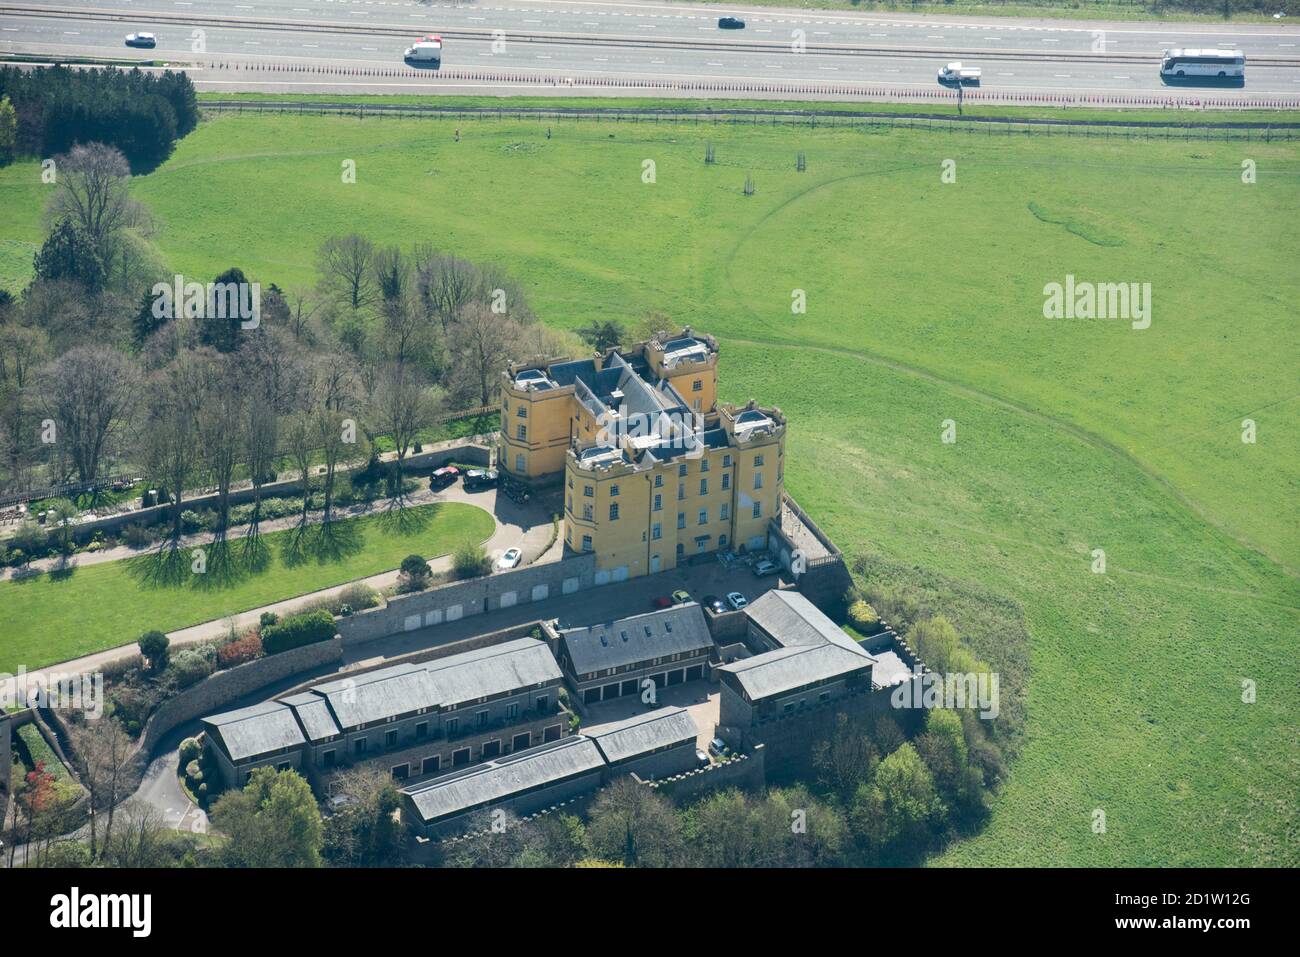 Former Dower House at Stoke Park, then became a Learning Disability Hospital from 1909 to 1988, converted into apartments in 2004, Bristol, 2018, UK. Aerial view. Stock Photo